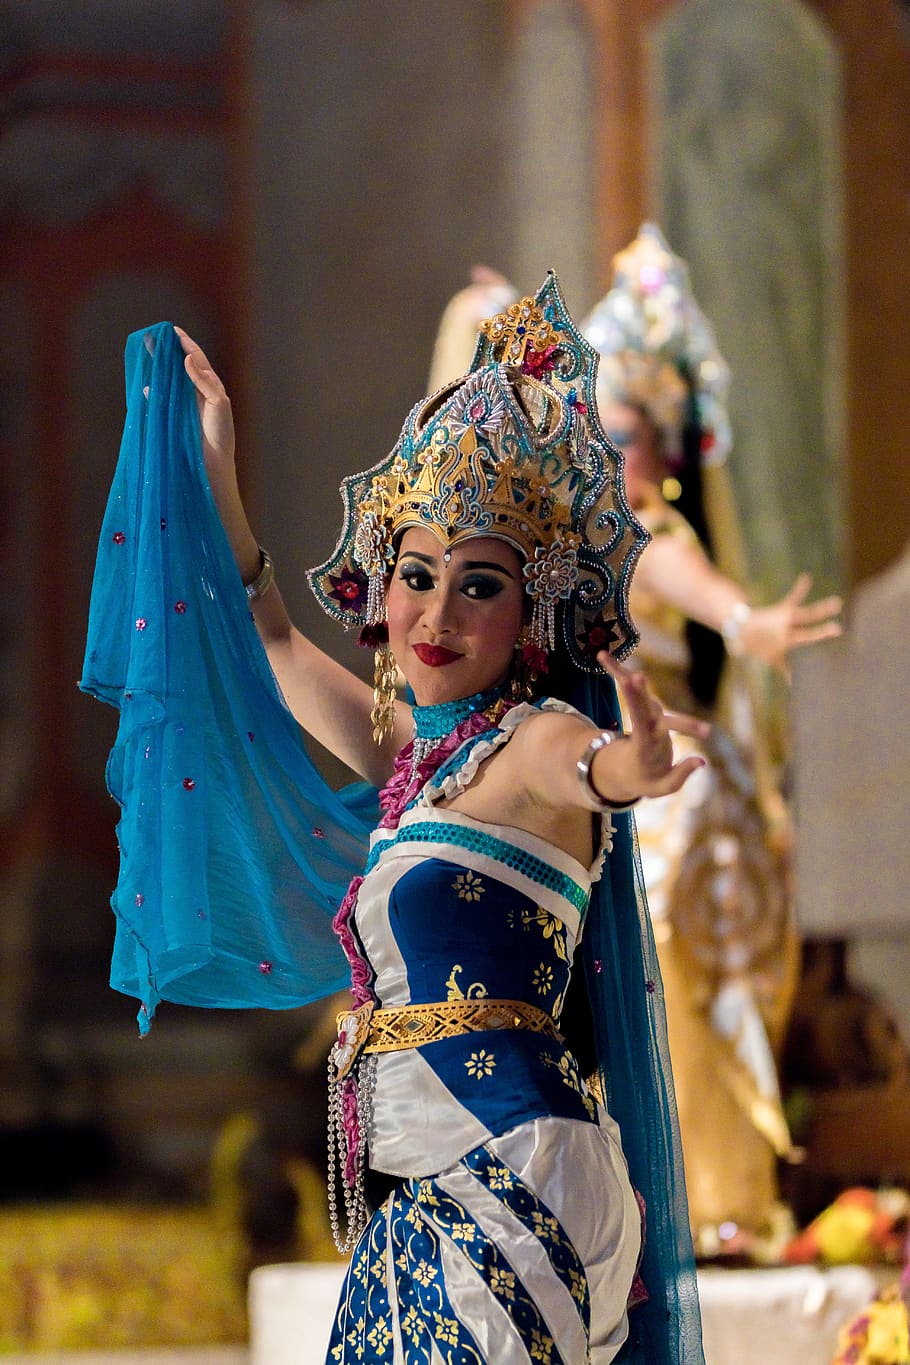 dancer, balinese, culture, girl, performance, indonesia, traditional, performer, people, dance